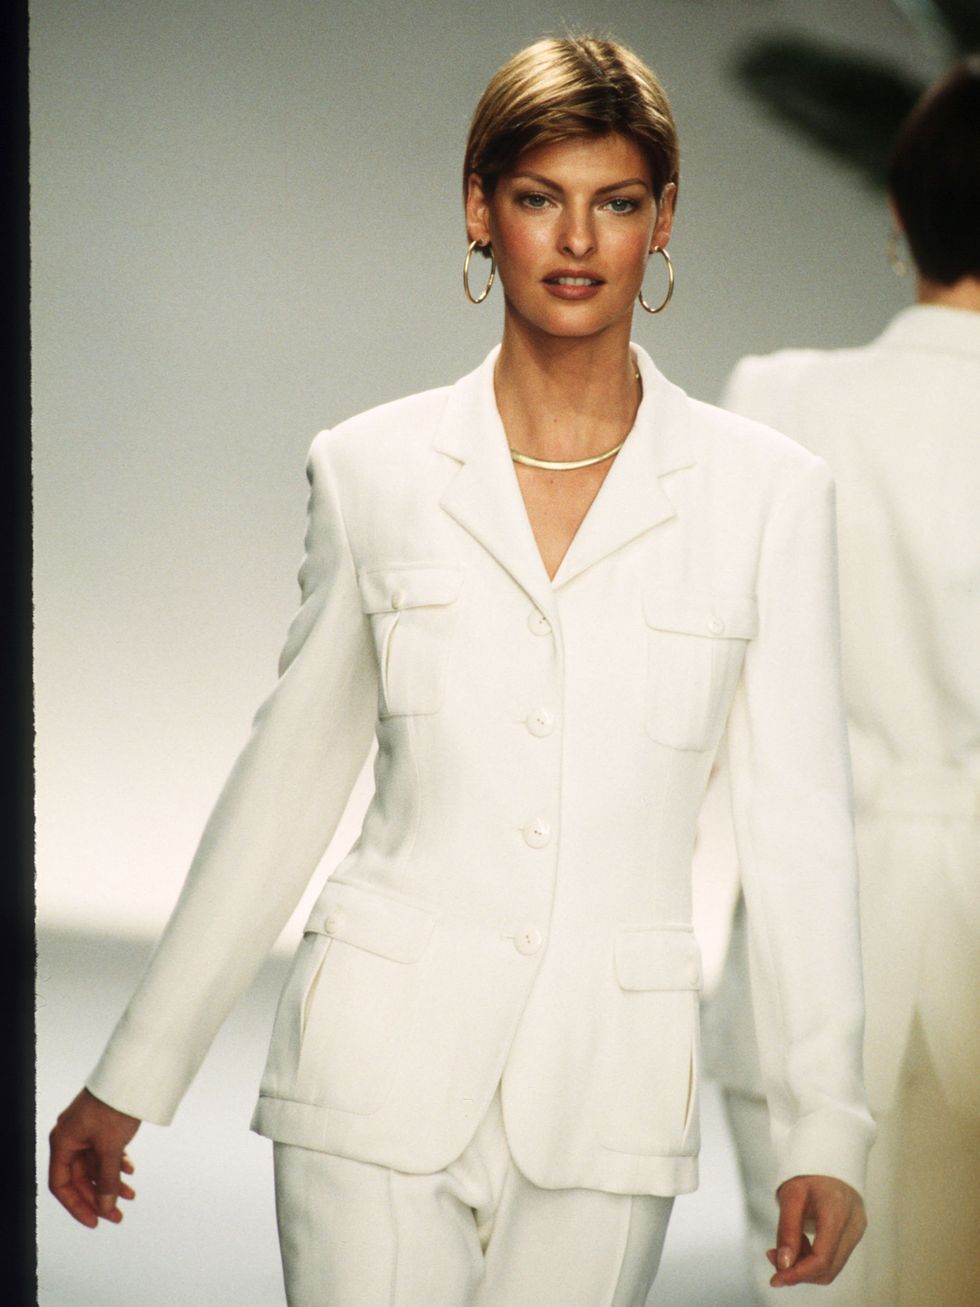 284461 03 linda evangelista models clothing from the ralph lauren spring 97 collection at the 7th on sixth fashion show october 30, 1996 in new york city ralph lauren became founder, designer and chairman of polo fashions new york in 1968 and rose to world fame when he designed the men's costume for "the great gatsby," in the 1974 film version of f scott fitzgerald's novel photo by evan agostiniliaison